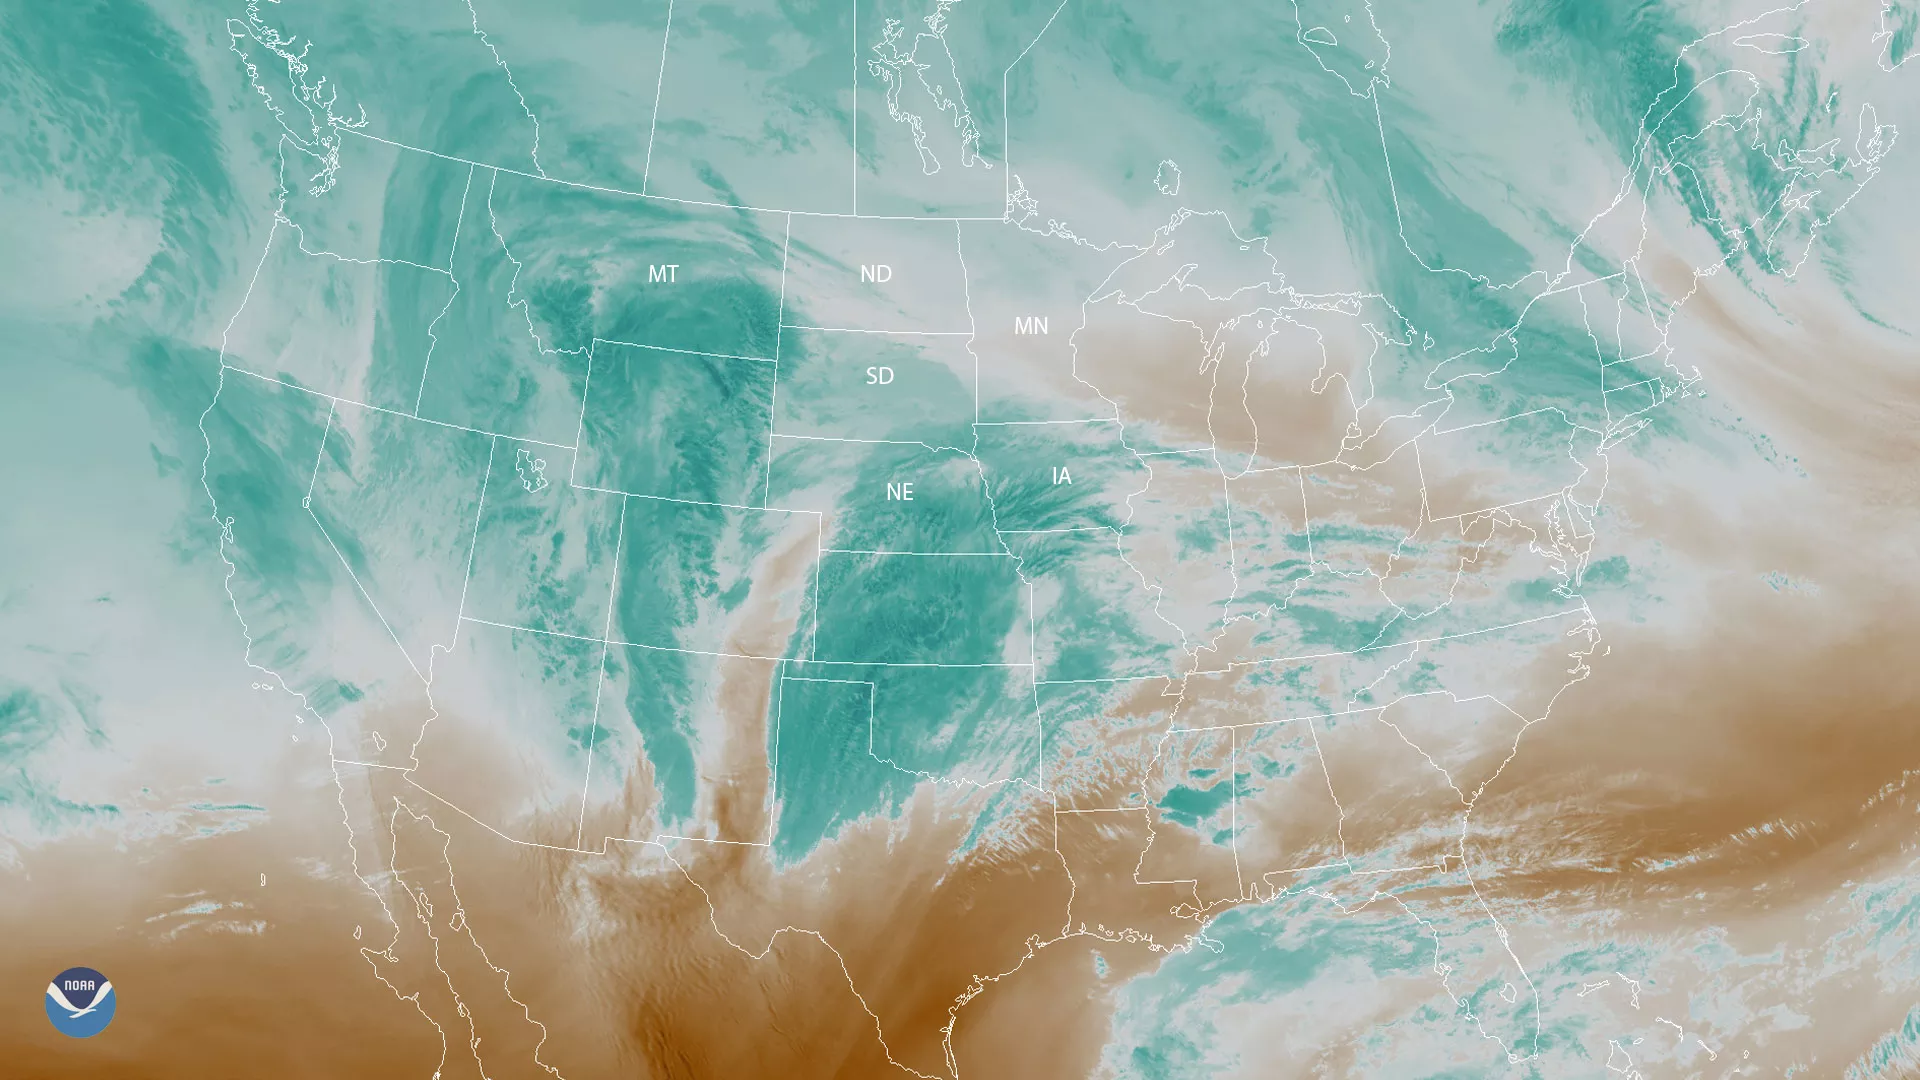 Water vapor imagery from GOES East shows wintry weather approaching parts of the Plains and the upper Midwest on Nov. 30, 2018.